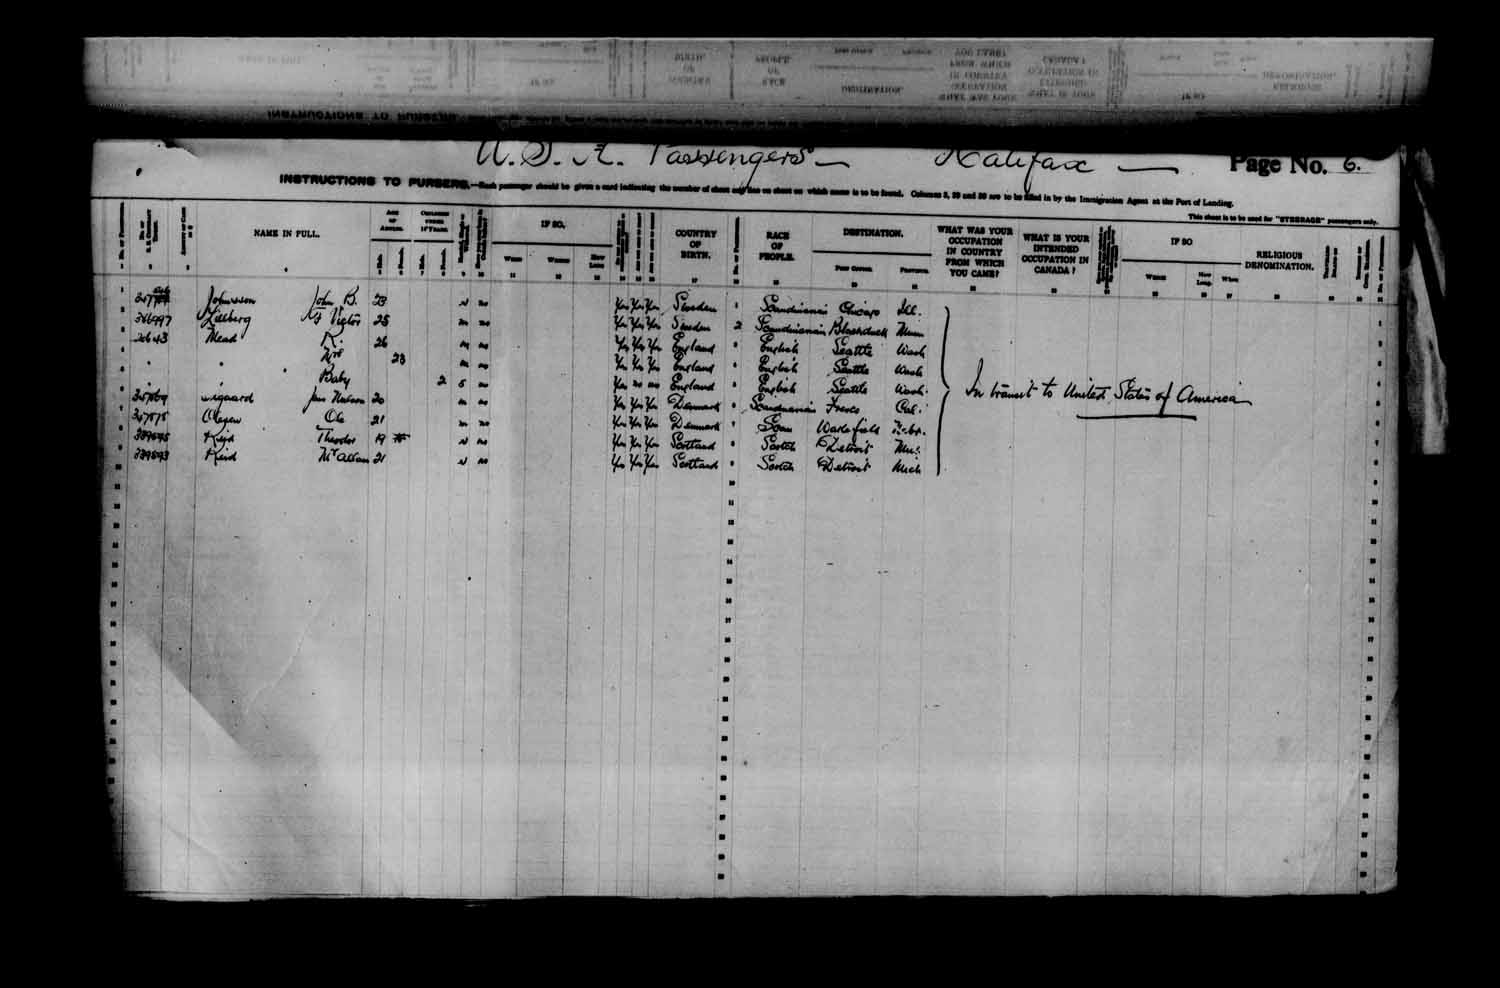 Digitized page of Passenger Lists for Image No.: e003622988